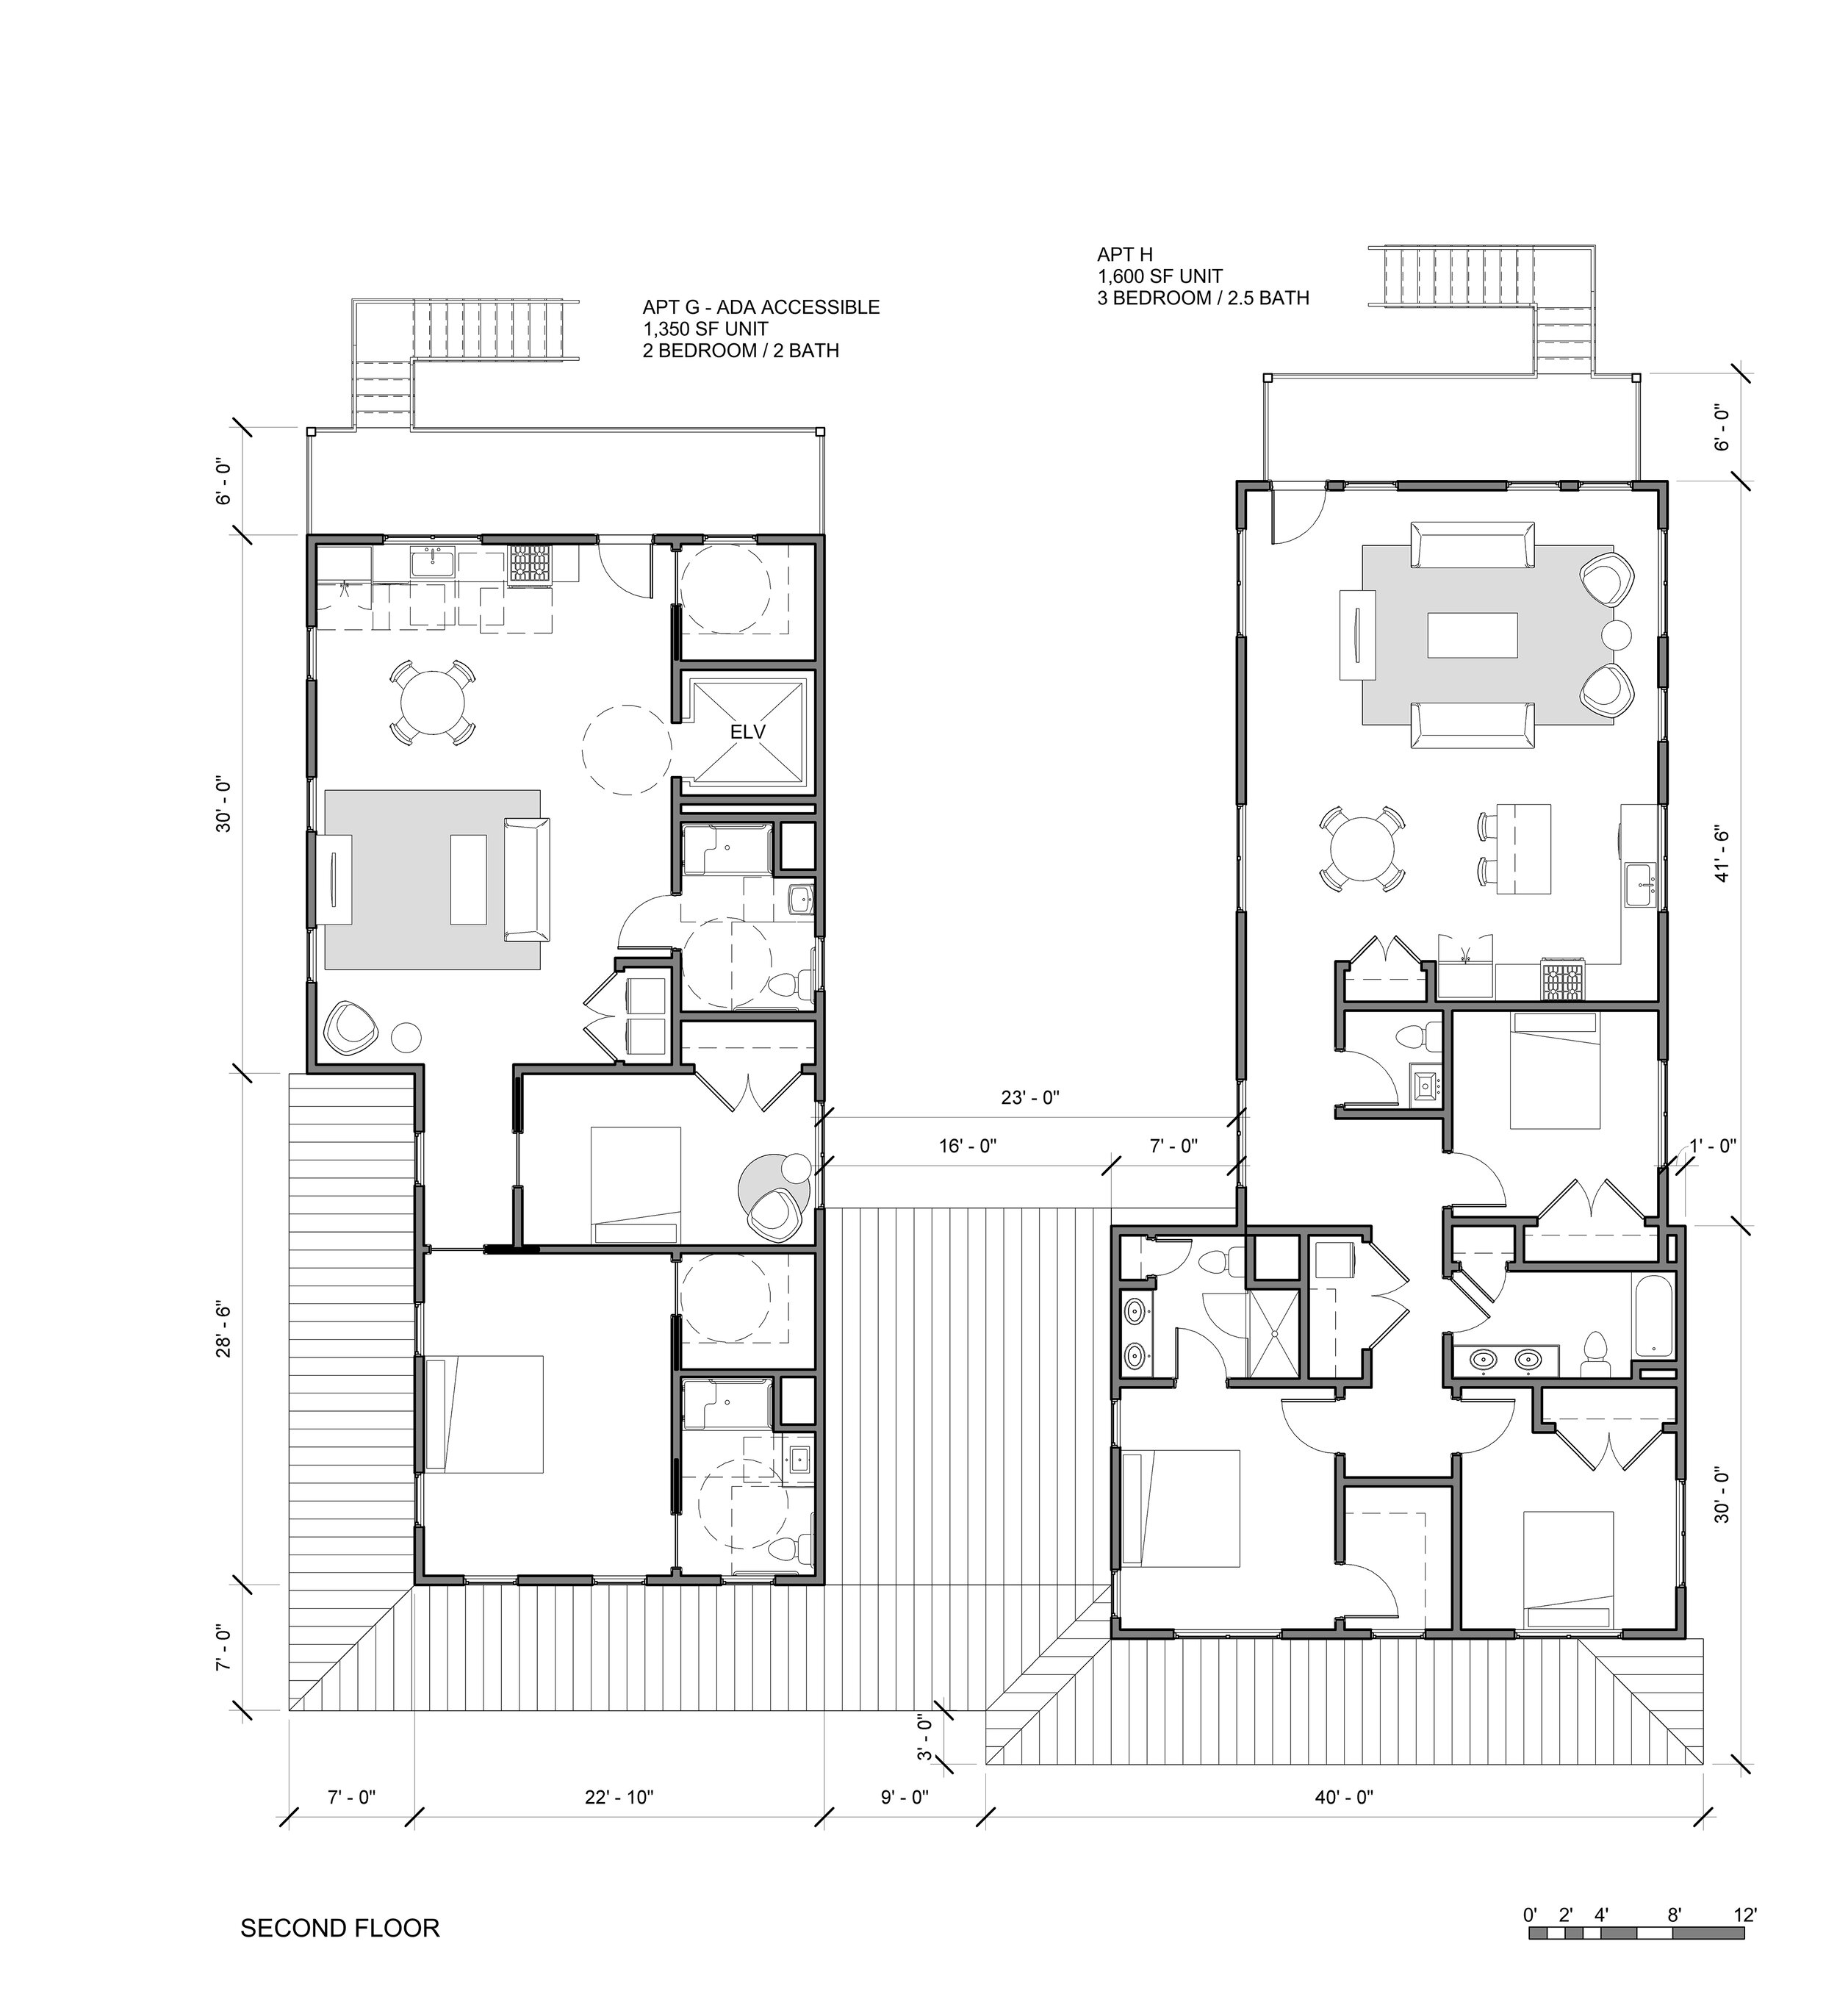 2021-05-17 BRILC Concept Plans - Floor Plan - CAMPBELL AVE MIXED USE UNITS - TOP LEVEL ed.jpg